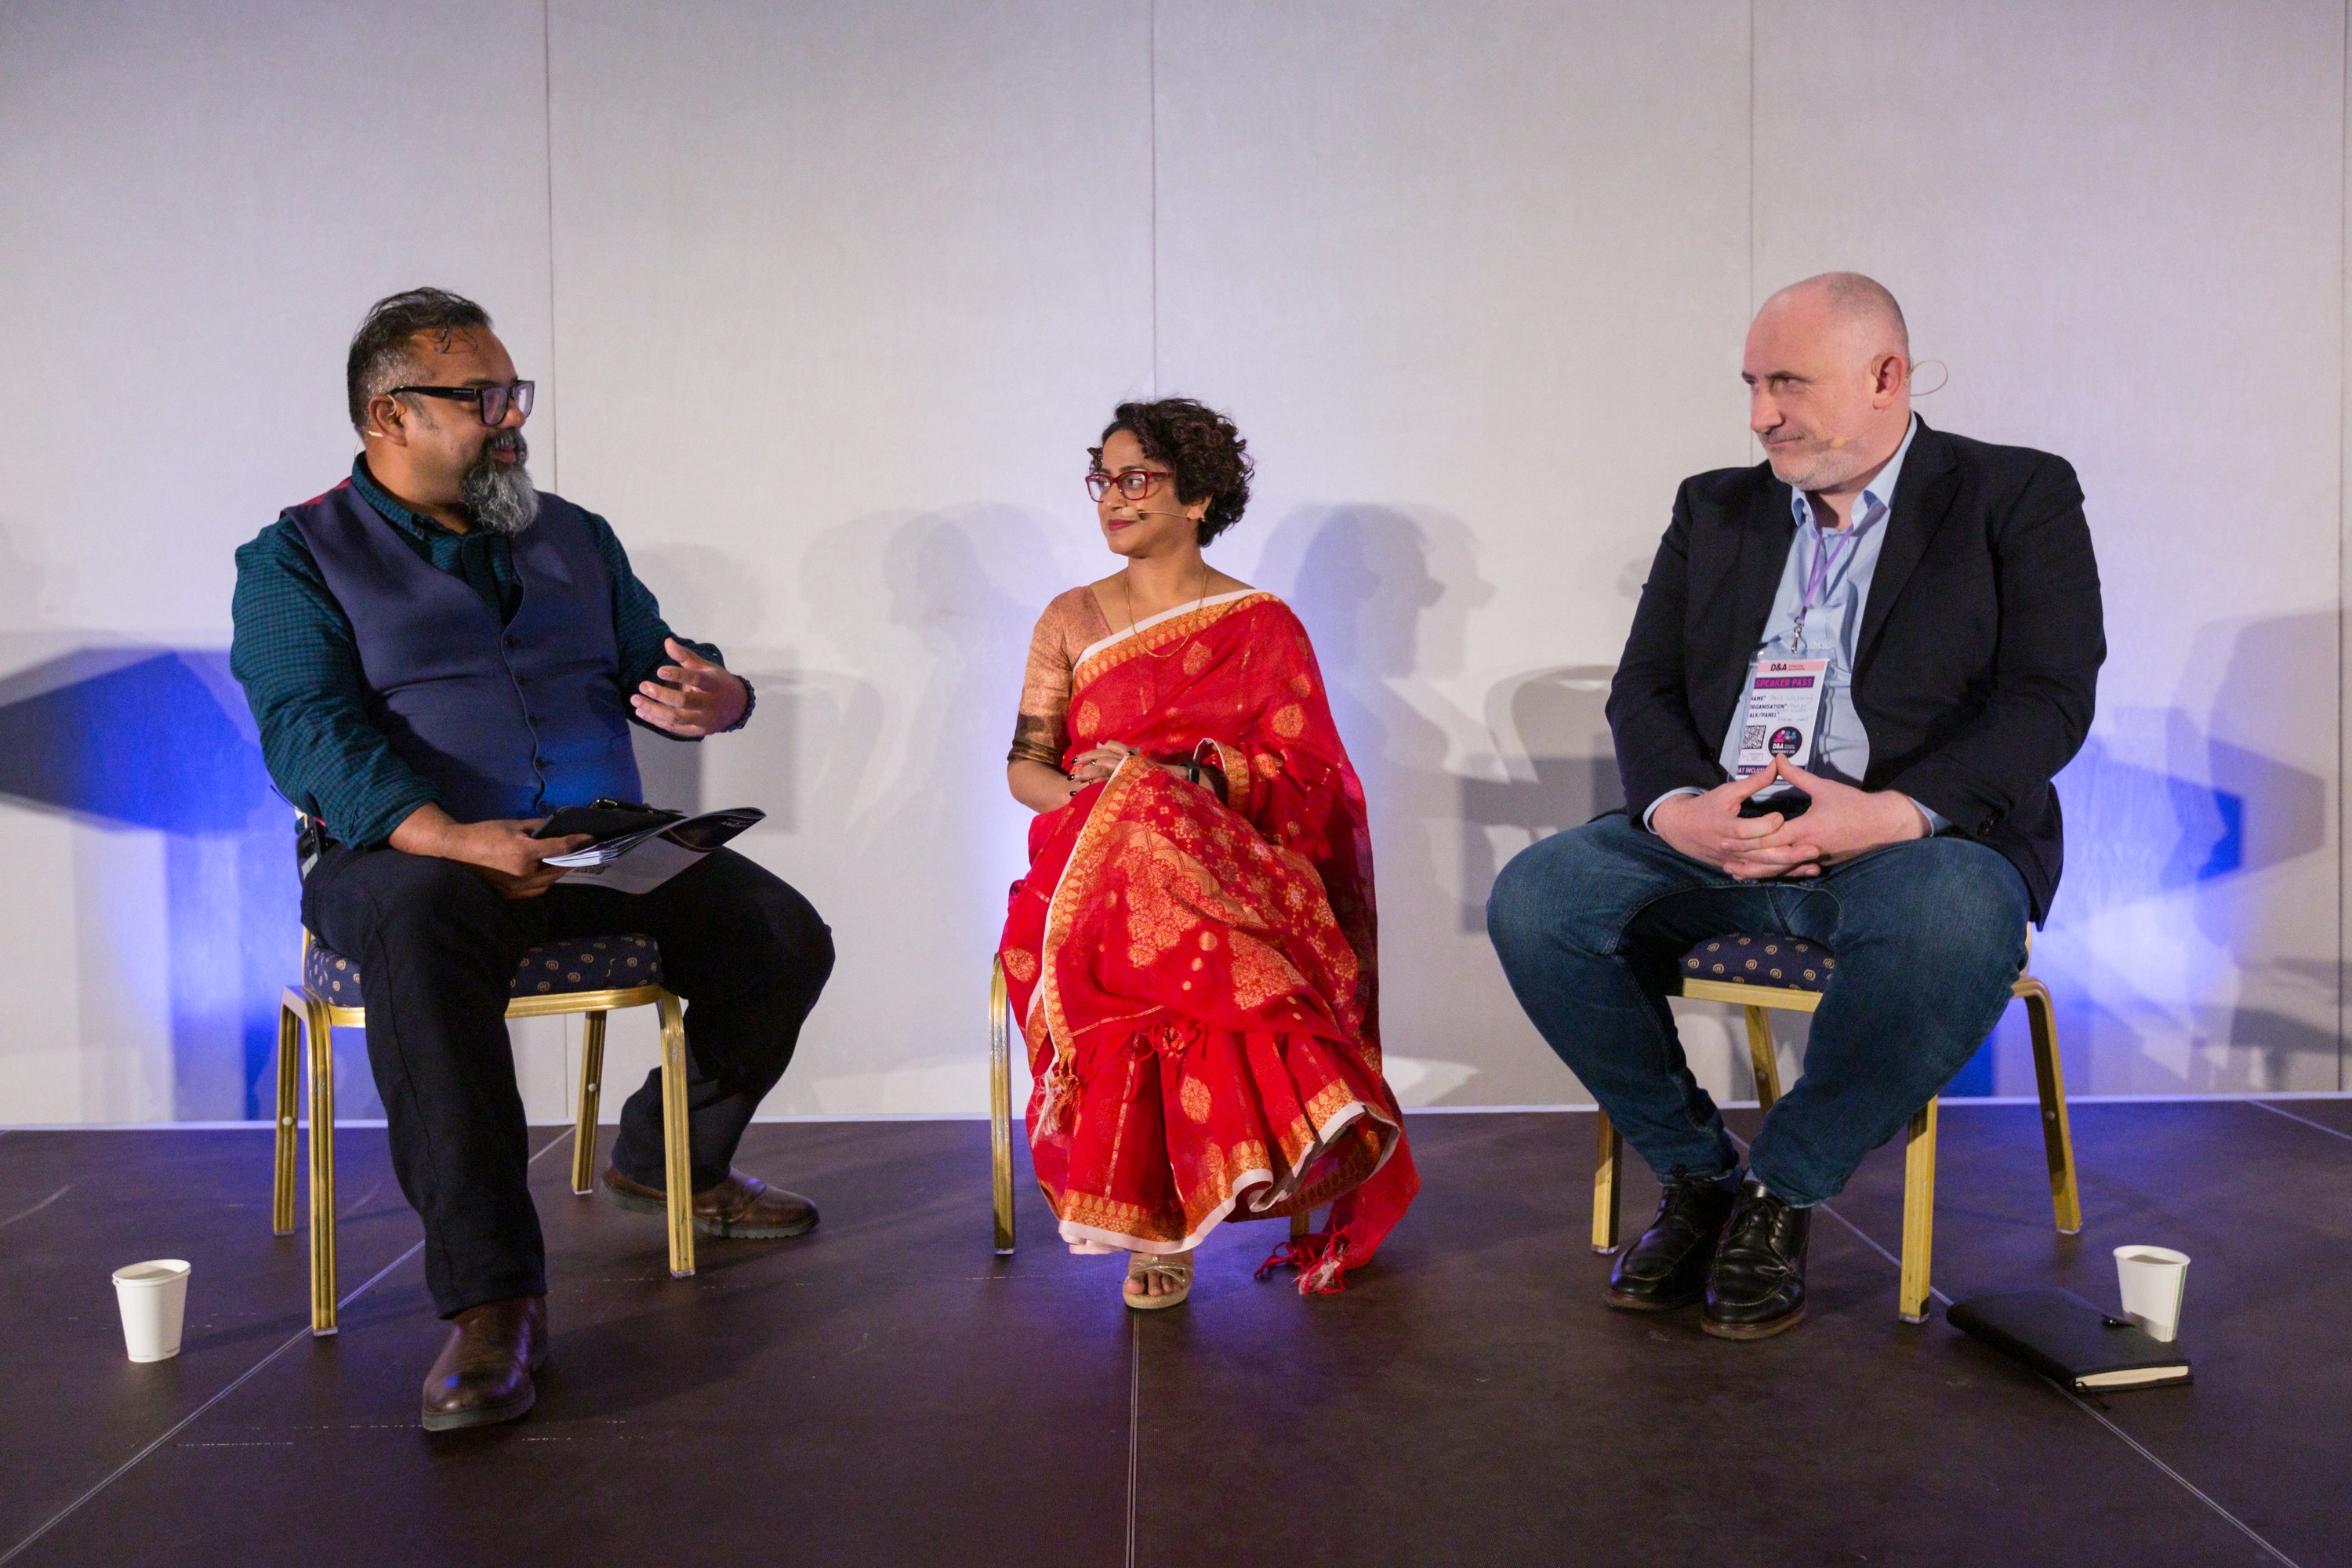 Three people sit on a stage, deep in conversation. They are, from  left to right: Atif, a brown man with dark hair and a grey beard, Poppy, a brown woman with short curly hair wearing a red sari, and David, a white man wearing a suit jacket and jeans. Atif is gesturing as he speaks.